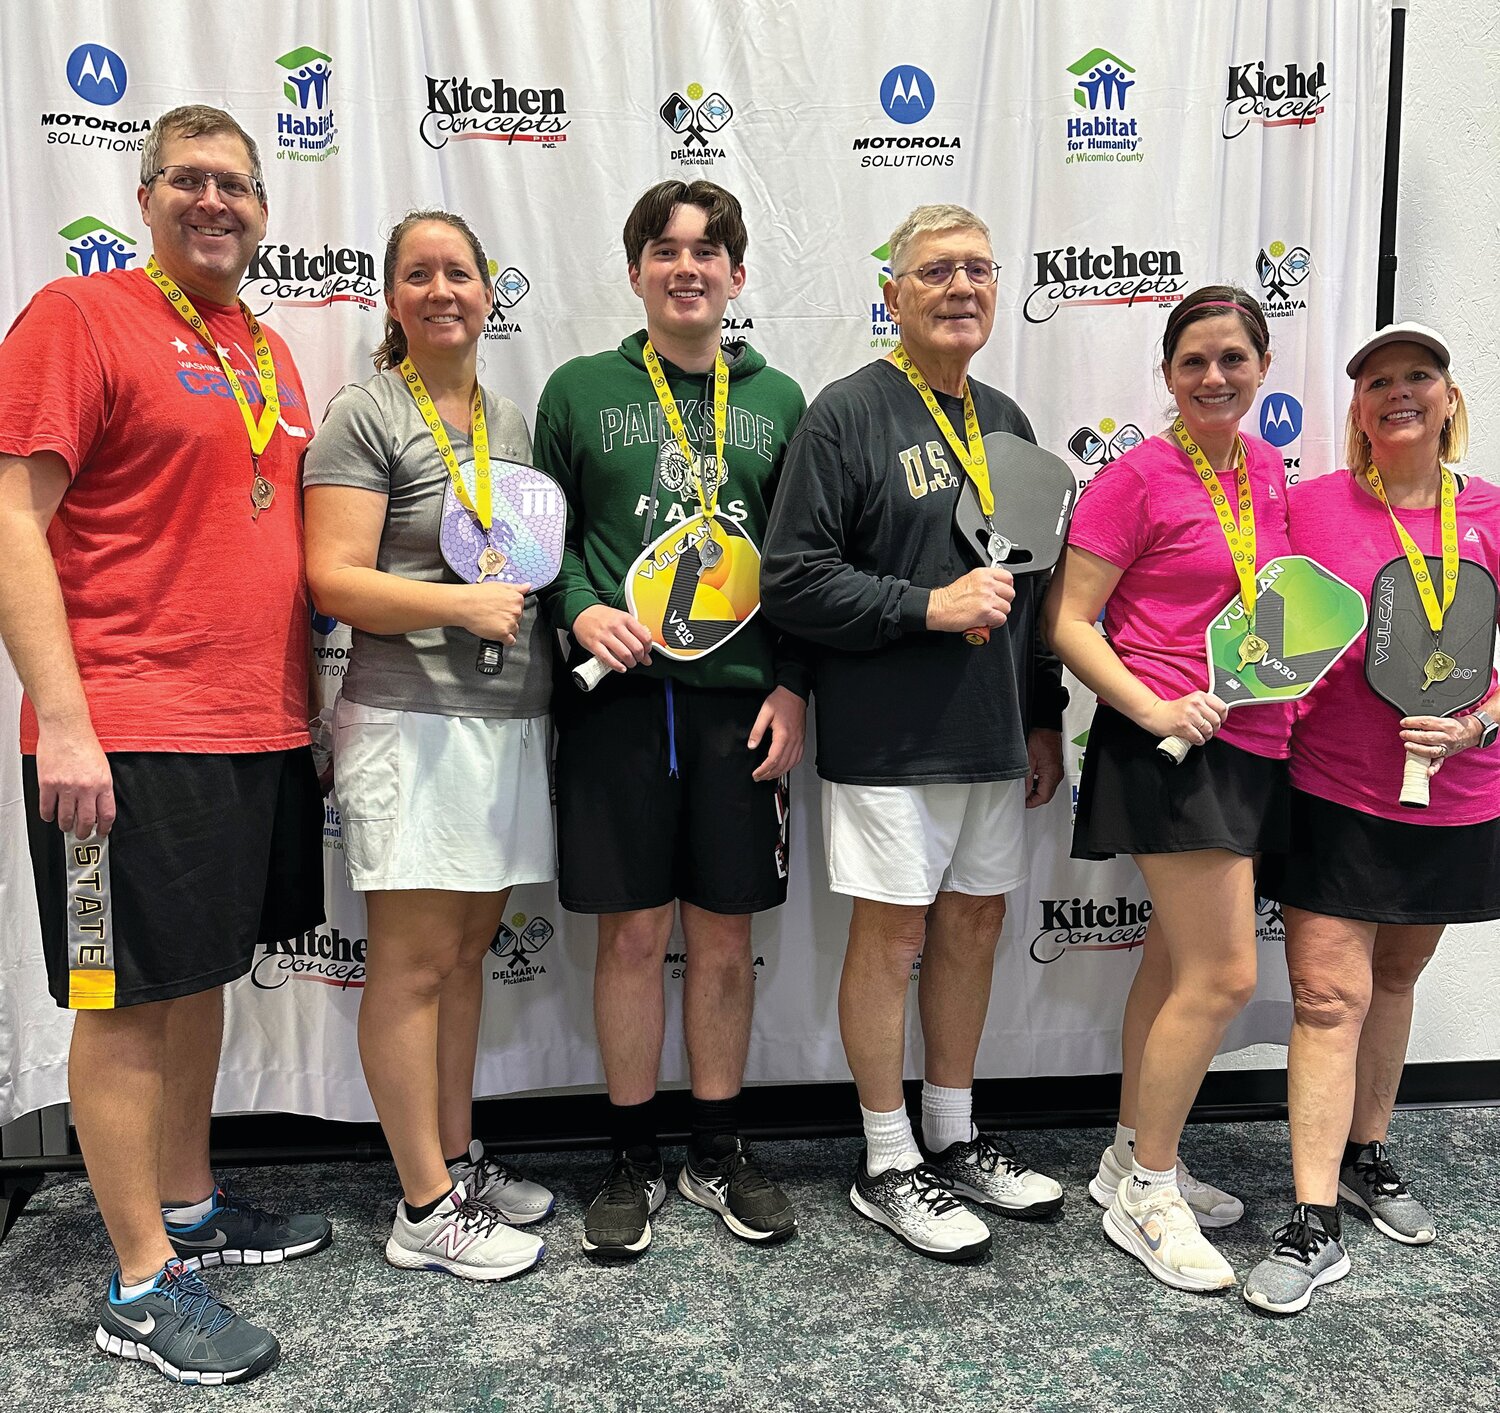 FRUITLAND -- On March 23, Habitat for Humanity of Wicomico County held their first “Kitchens for Kitchens Pickleball Tournament” fundraiser at Crown Sports Center in Fruitland, with 60 players of various ages and skill levels participating. [Courtesy photo]